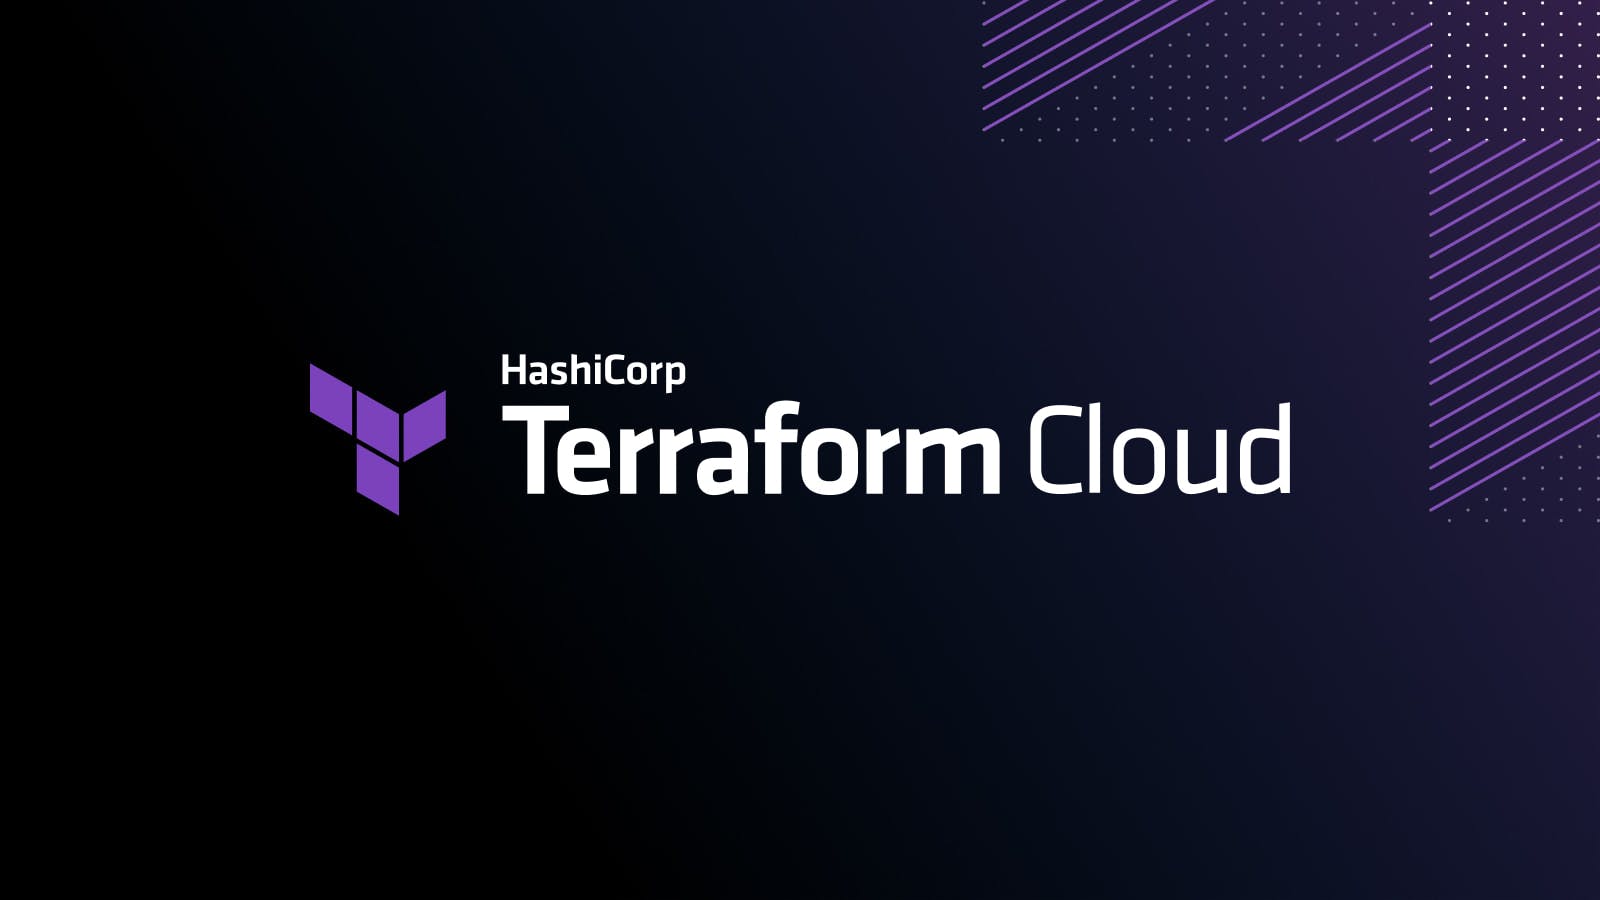 Terraform Cloud updates plans with an enhanced Free tier and more flexibility 